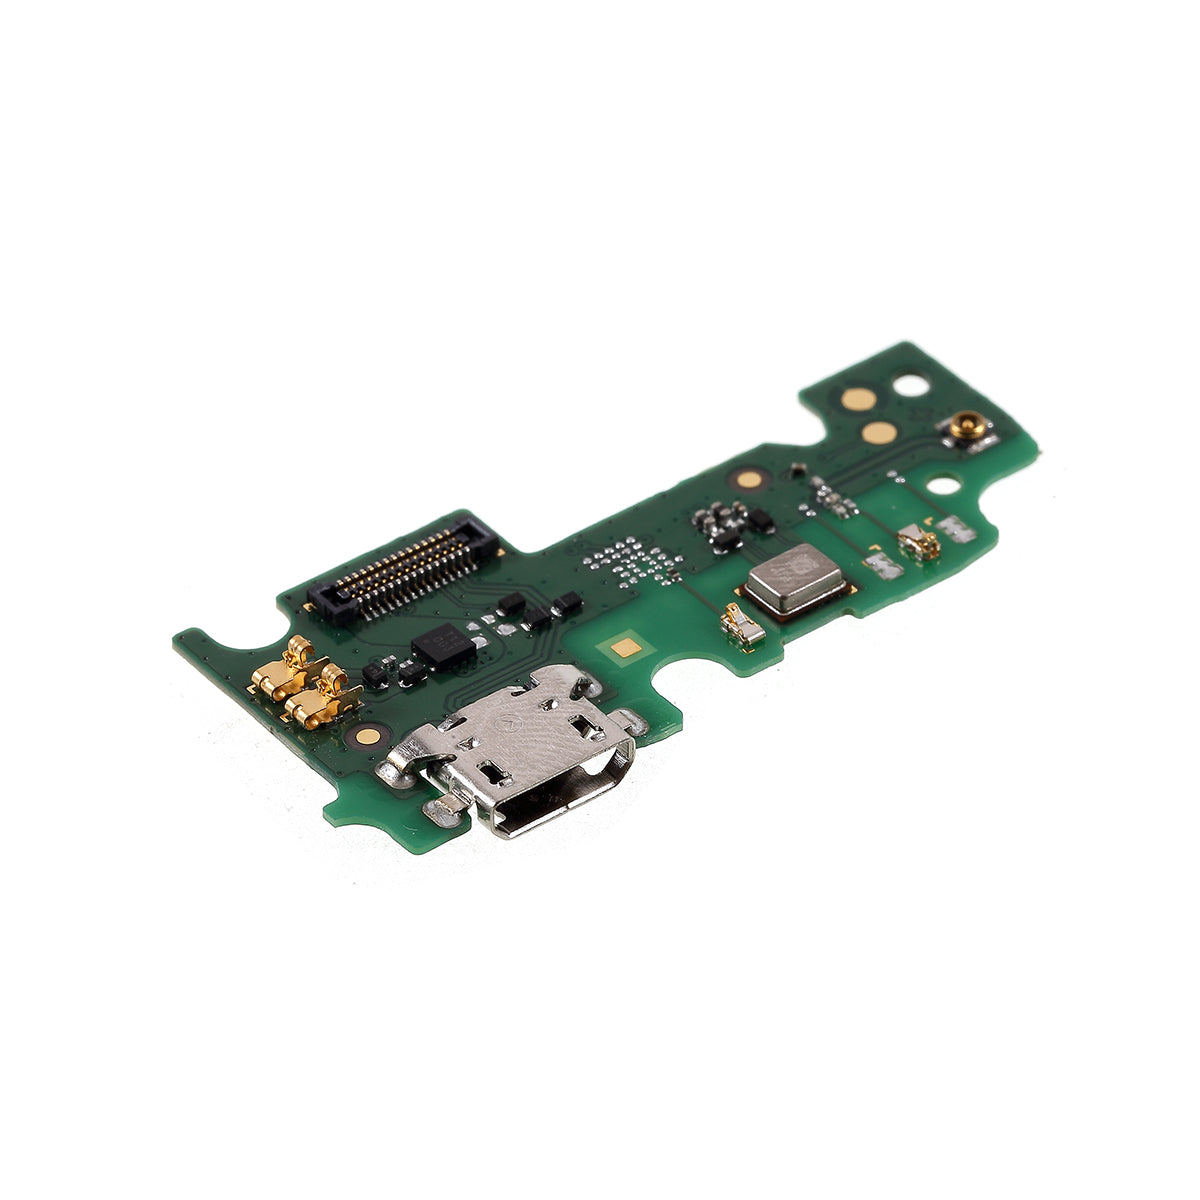 OEM Charging Port Board Replacement for Alcatel 3 / 5052